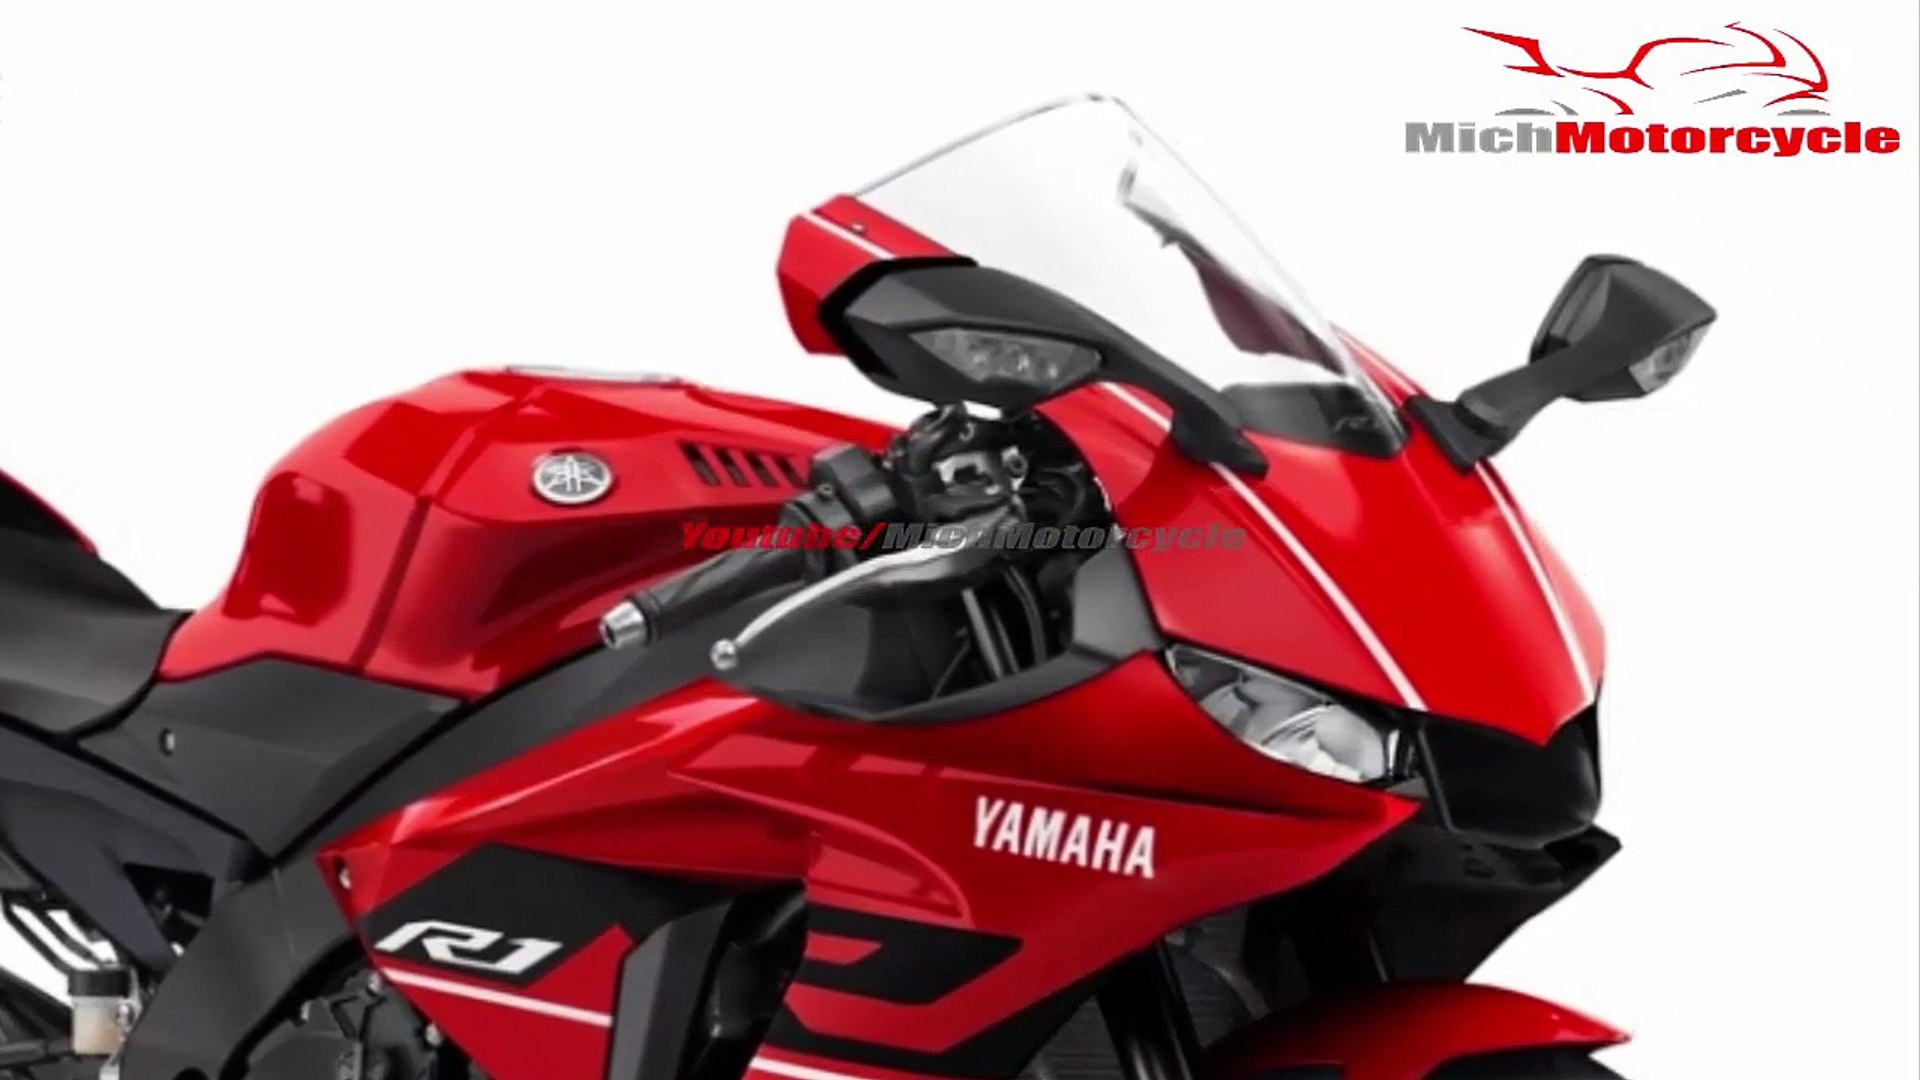 2019 Yamaha R1 With Dual Headlight Concept Design By Julaksendiedesign |  Mich Motorcycle - Dailymotion Video